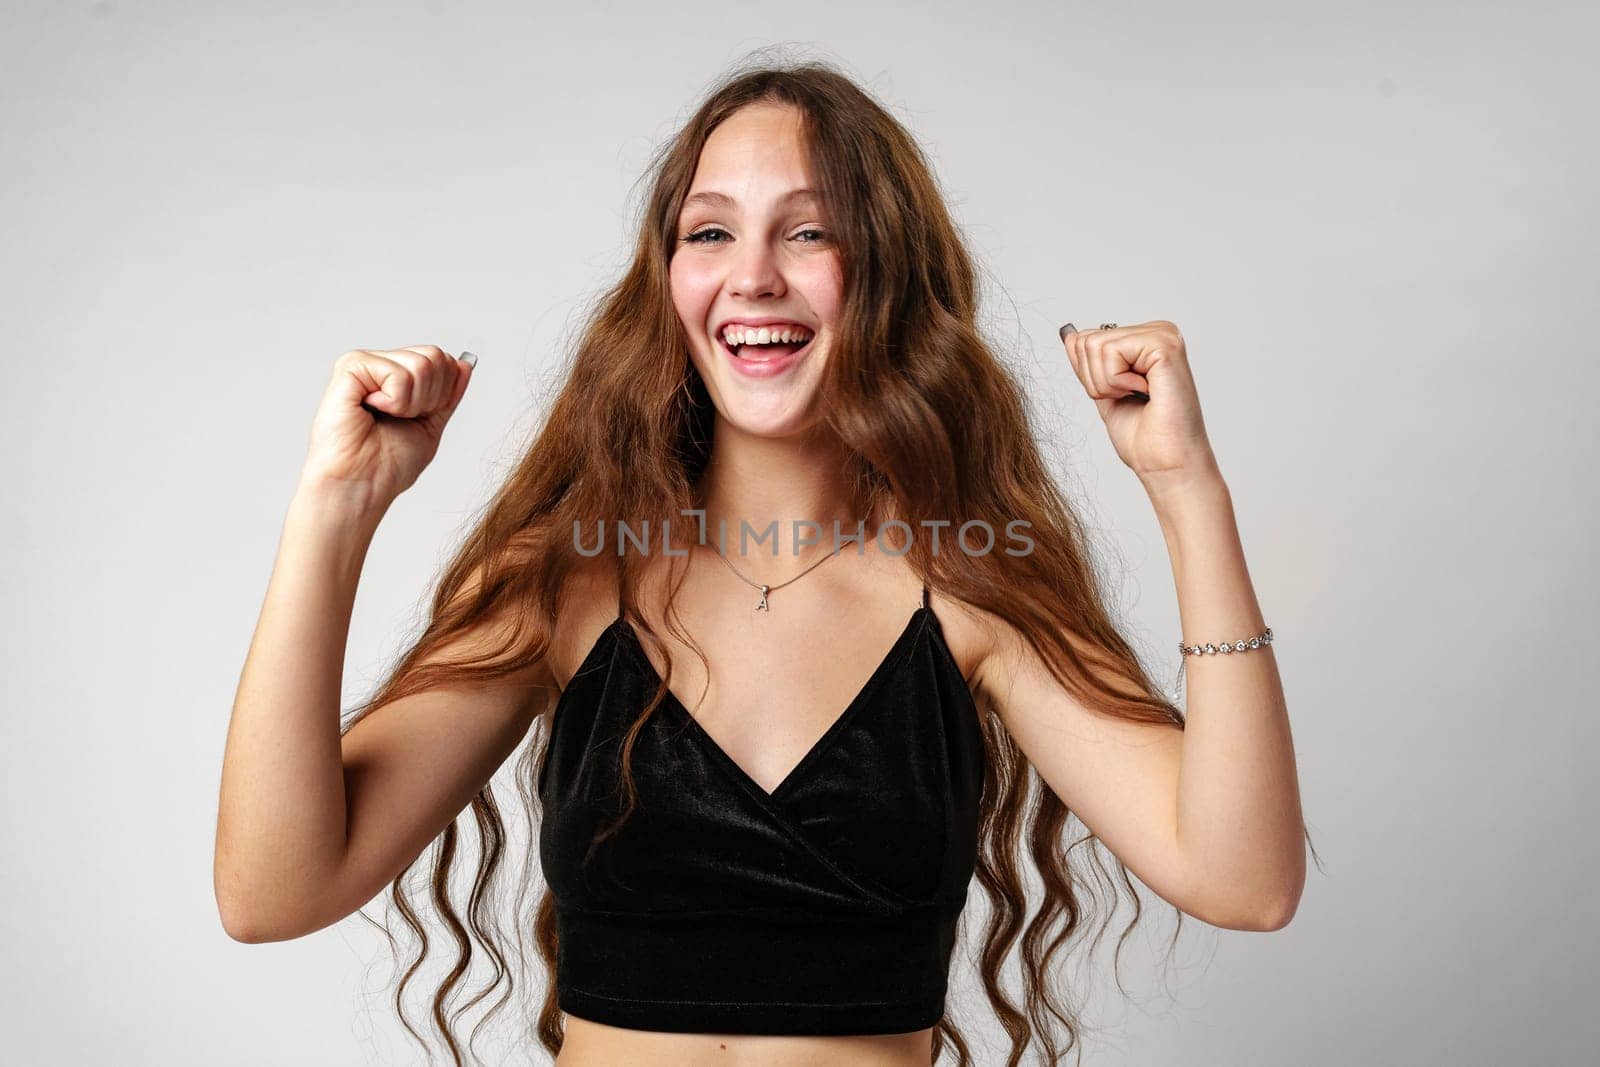 A young woman with long, wavy hair is exuberantly raising her fists in a gesture of victory or celebration. She is wearing a sleeveless black top and smiling broadly, showing a sense of joy and achievement as she looks slightly off-camera.